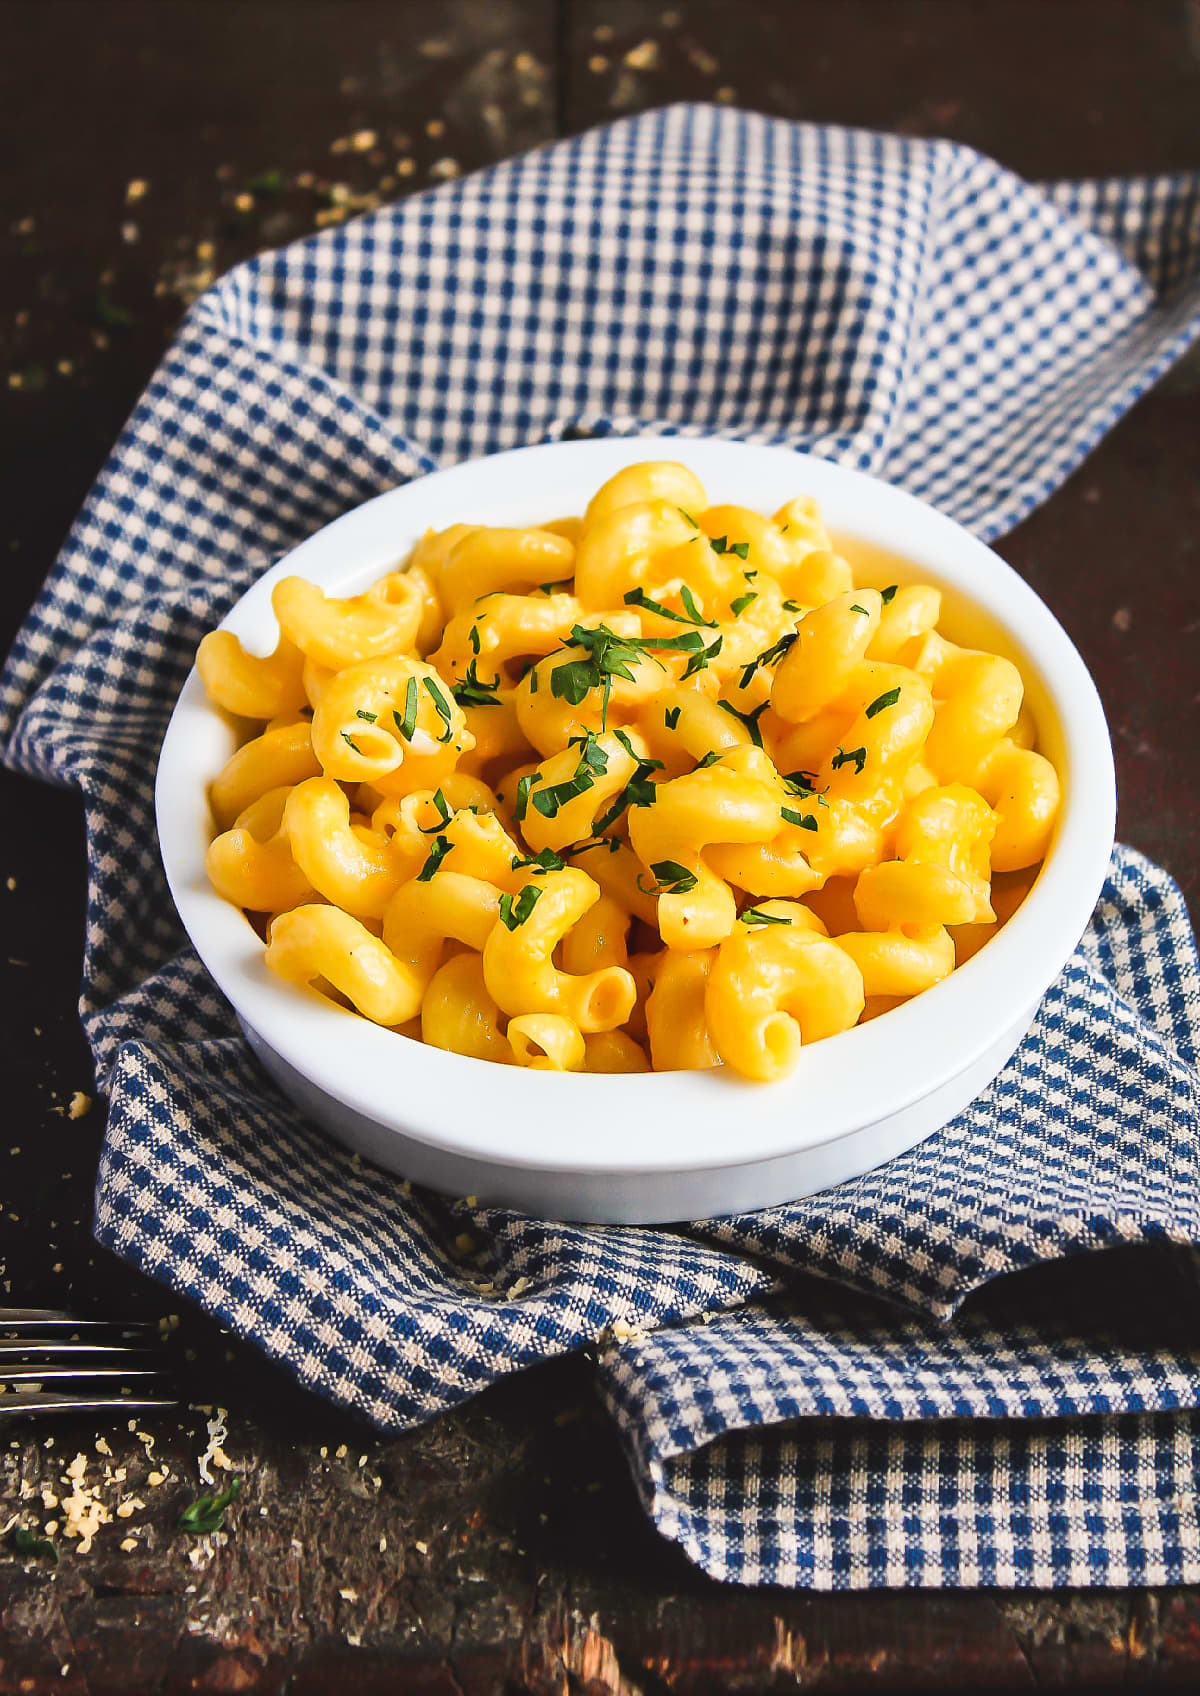 Mac and cheese in a white bowl resting on checkered cloth